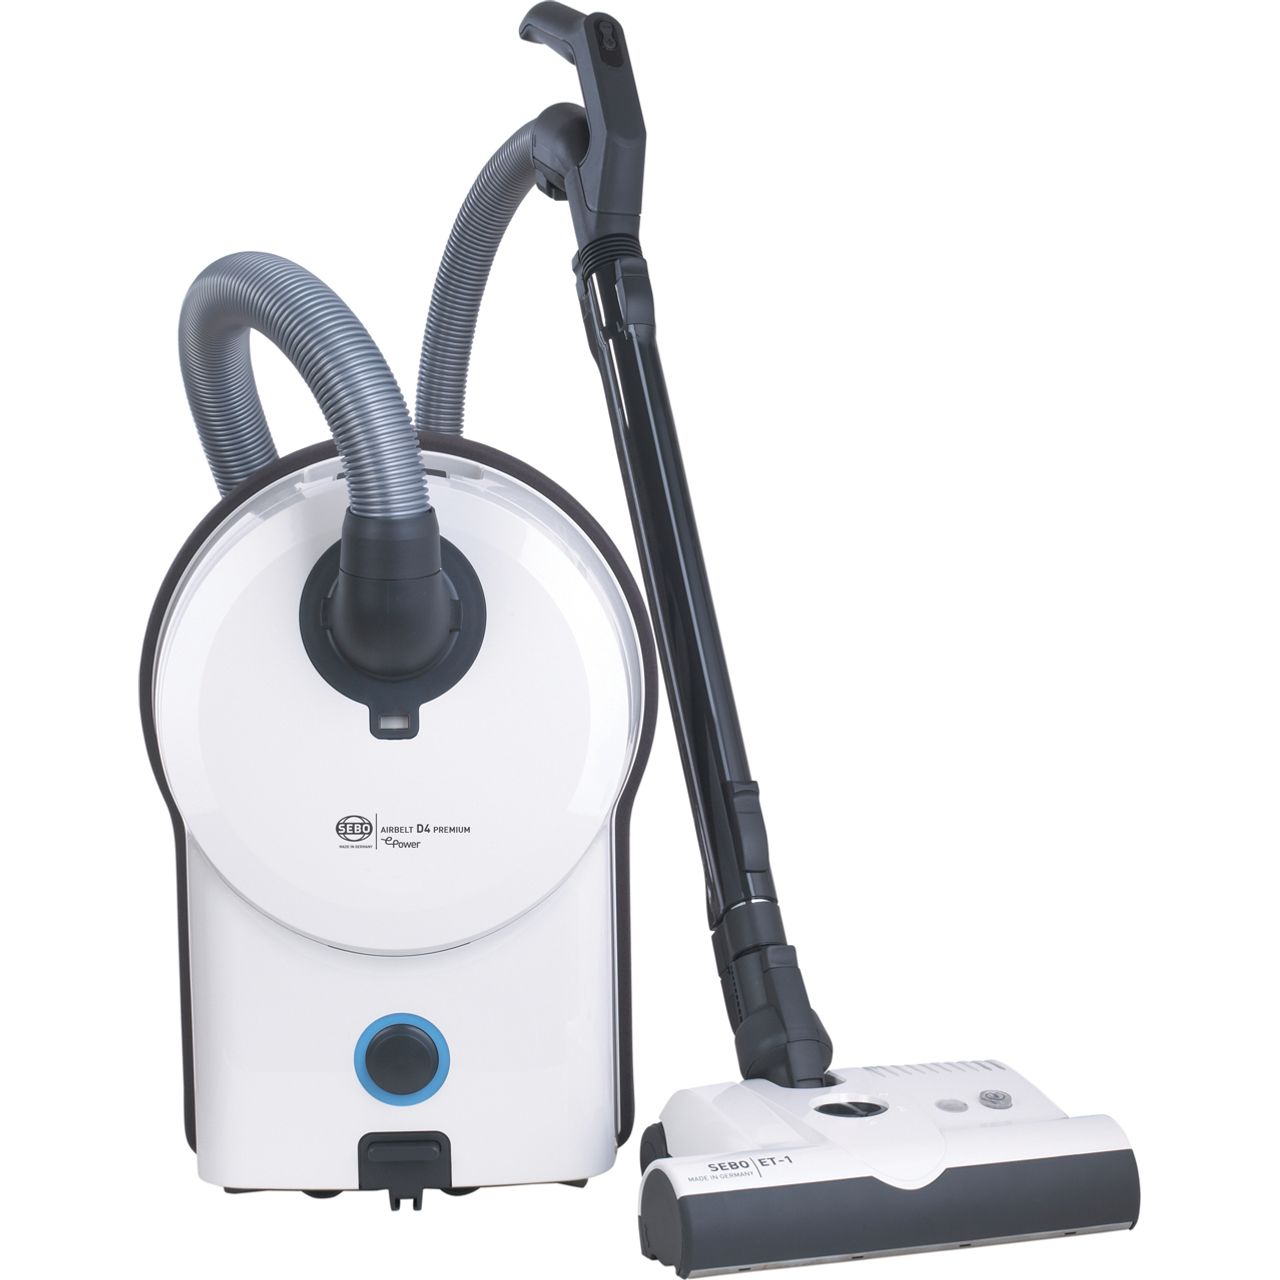 Sebo Airbelt D4 Premium ePower 90951GB Cylinder Vacuum Cleaner Review